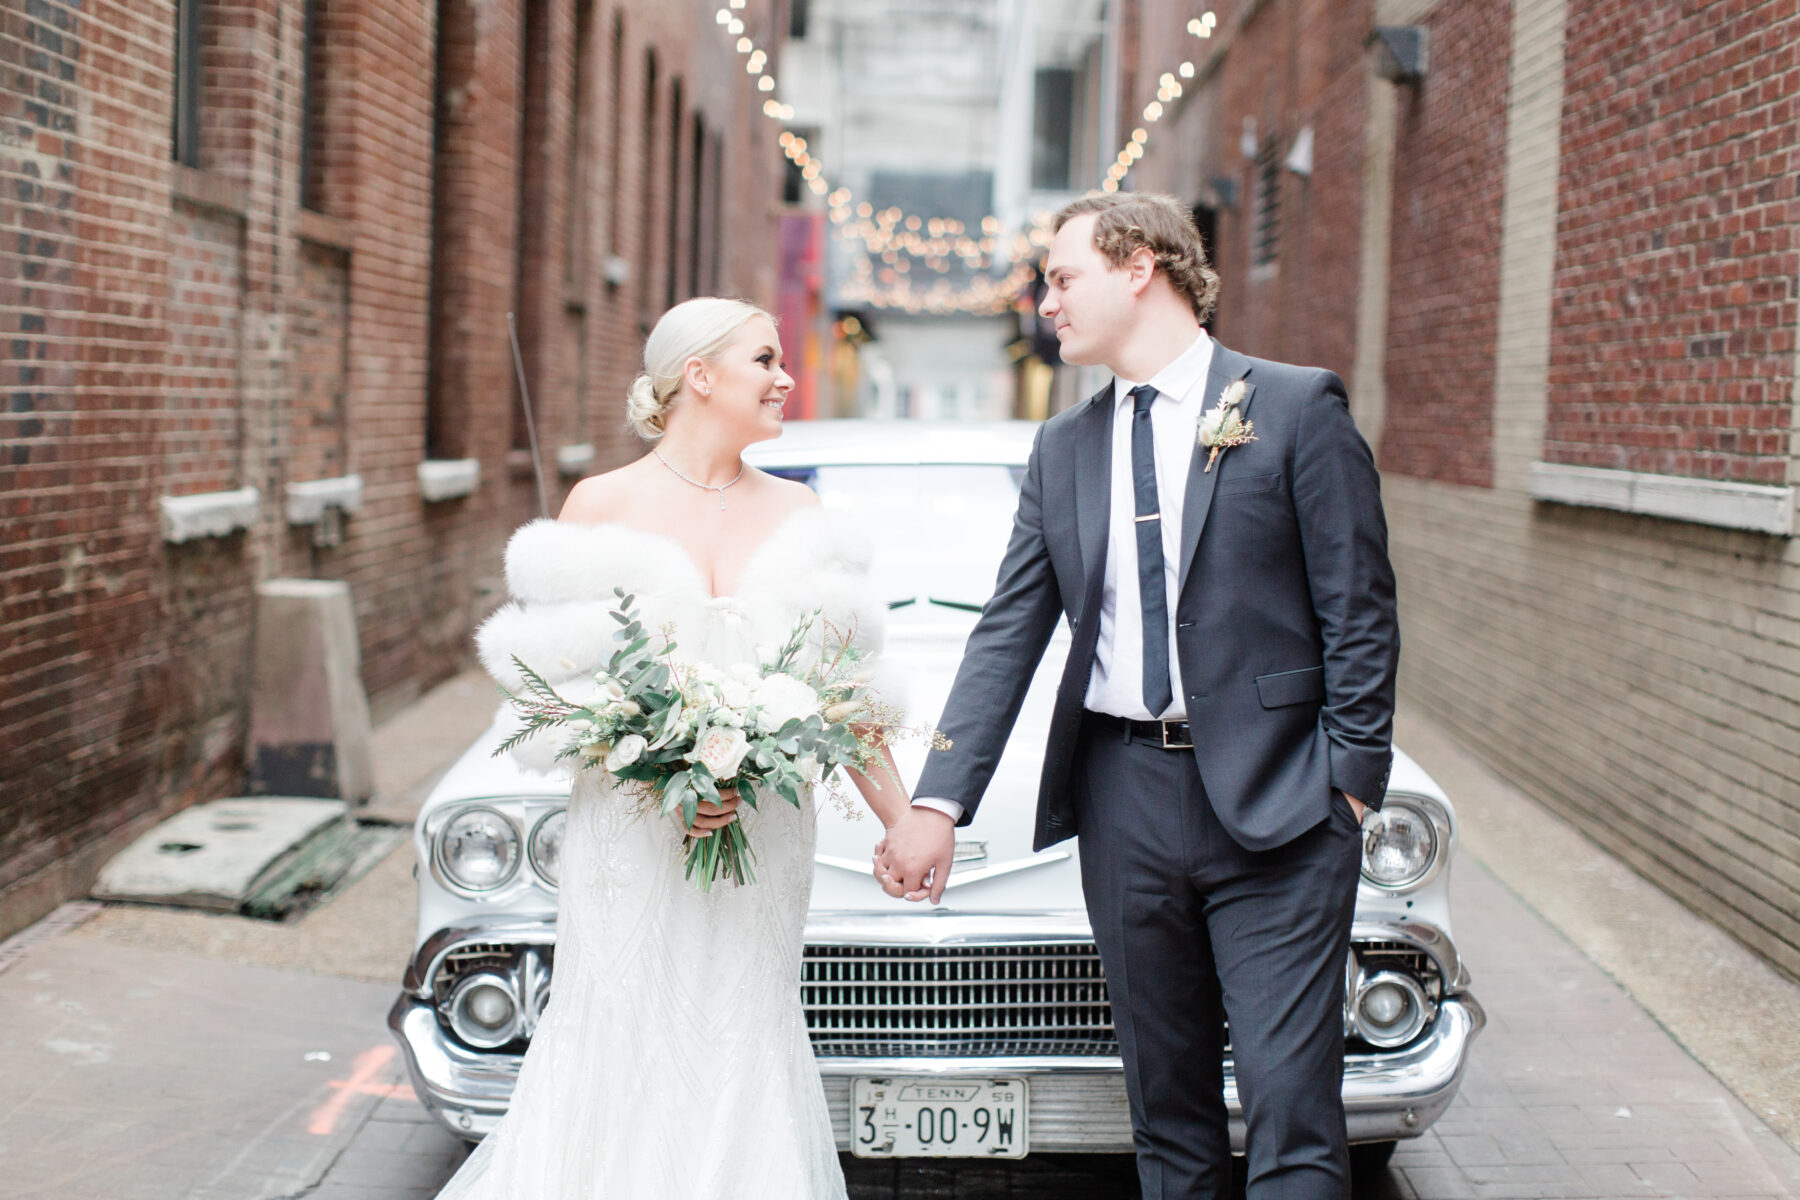 Classic, Yet Modern New Years Eve Wedding Inspiration featured on Nashville Bride Guide